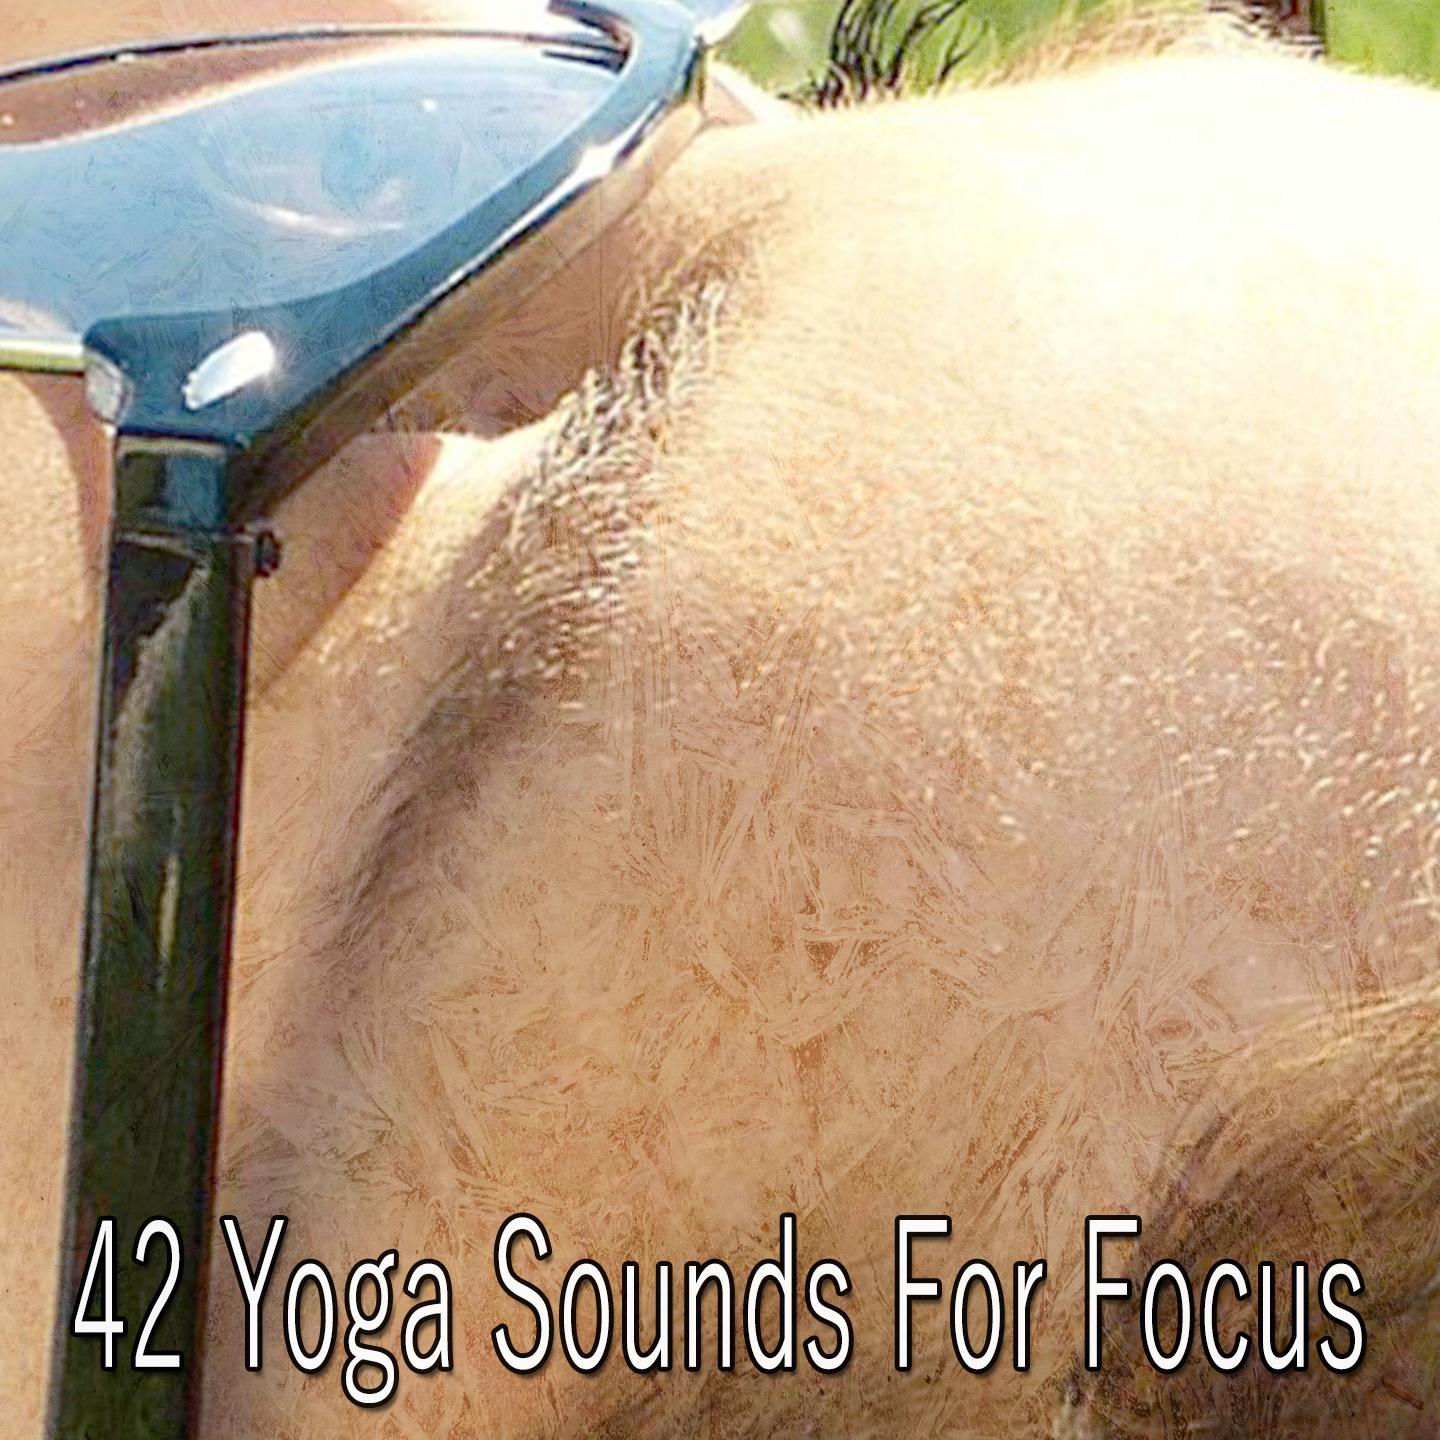 42 Yoga Sounds for Focus